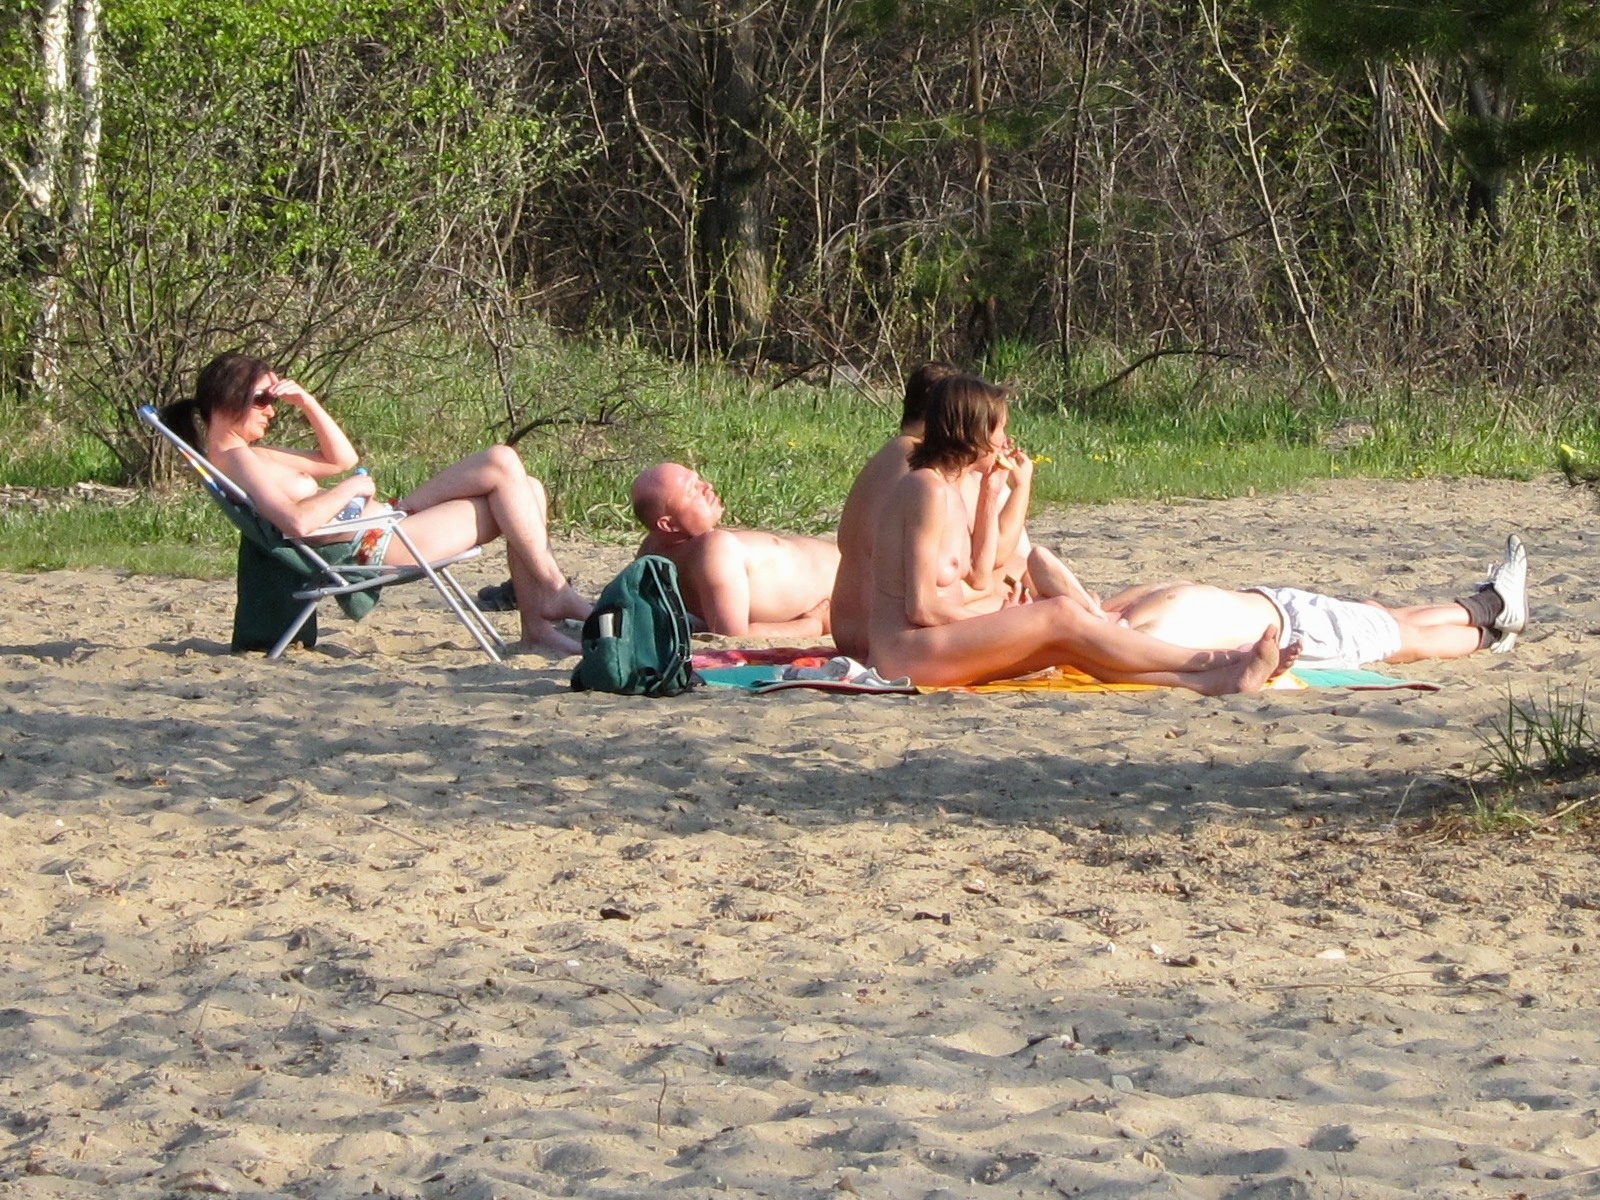 brendan james kennedy recommends russian nudists beach pic